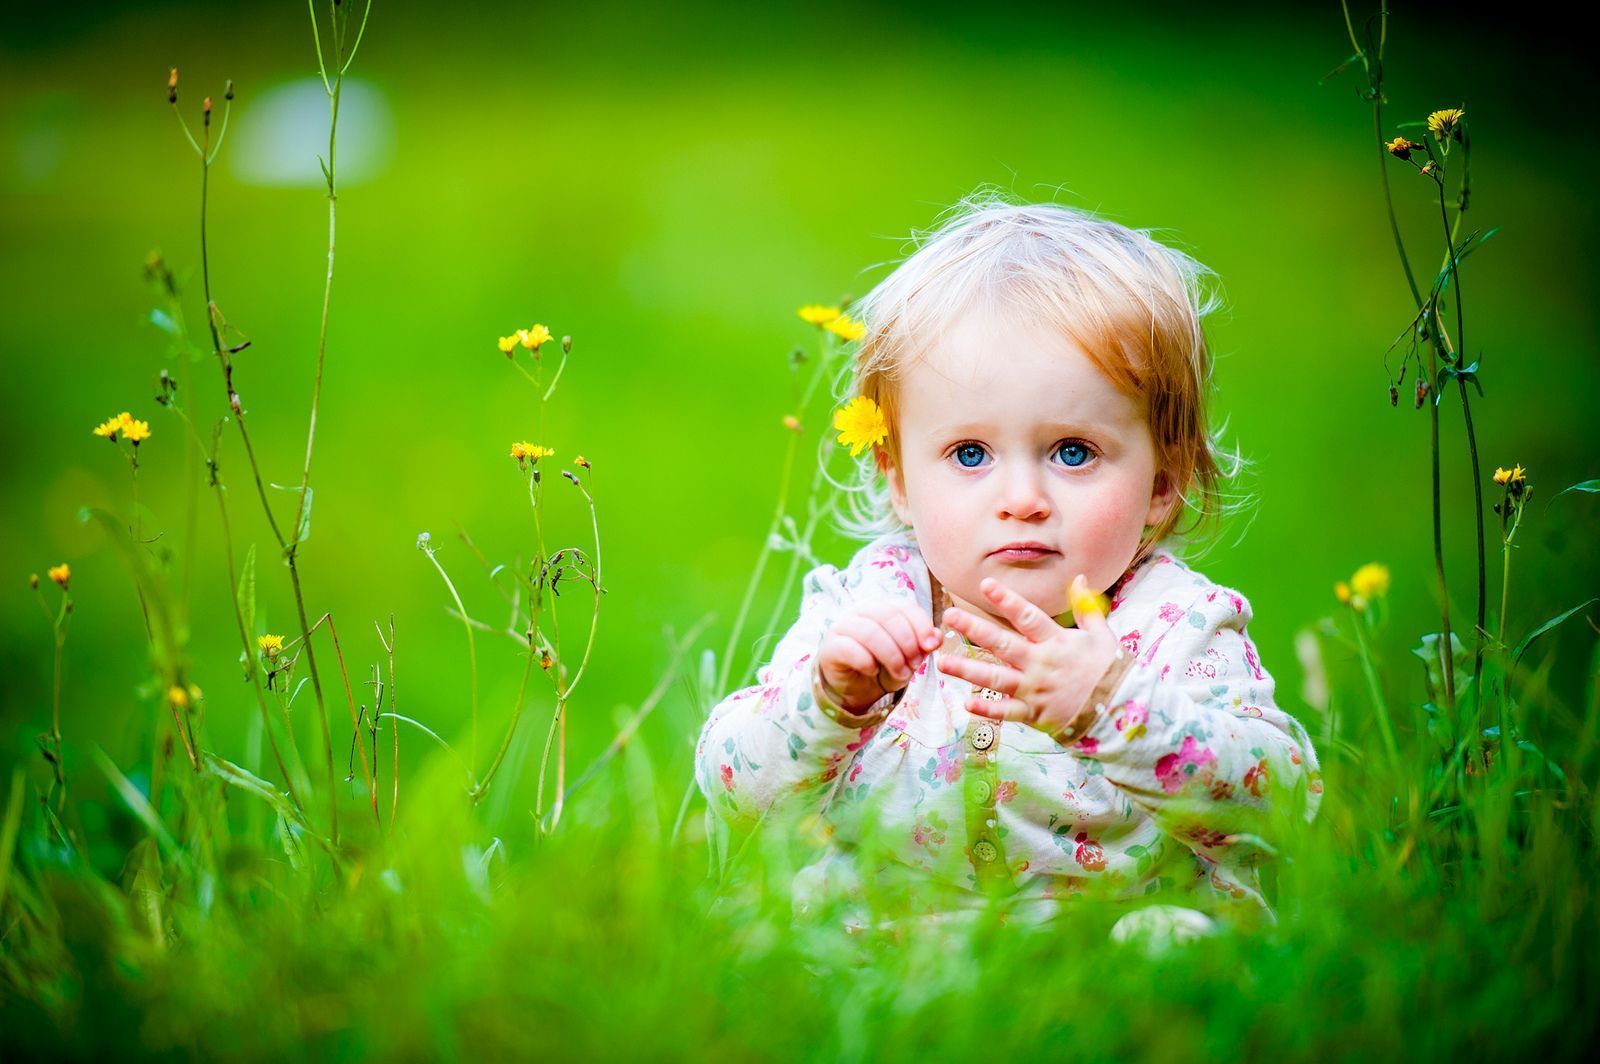 Cute Baby Girls Wallpapers HD Pictures | One HD Wallpaper Pictures ...